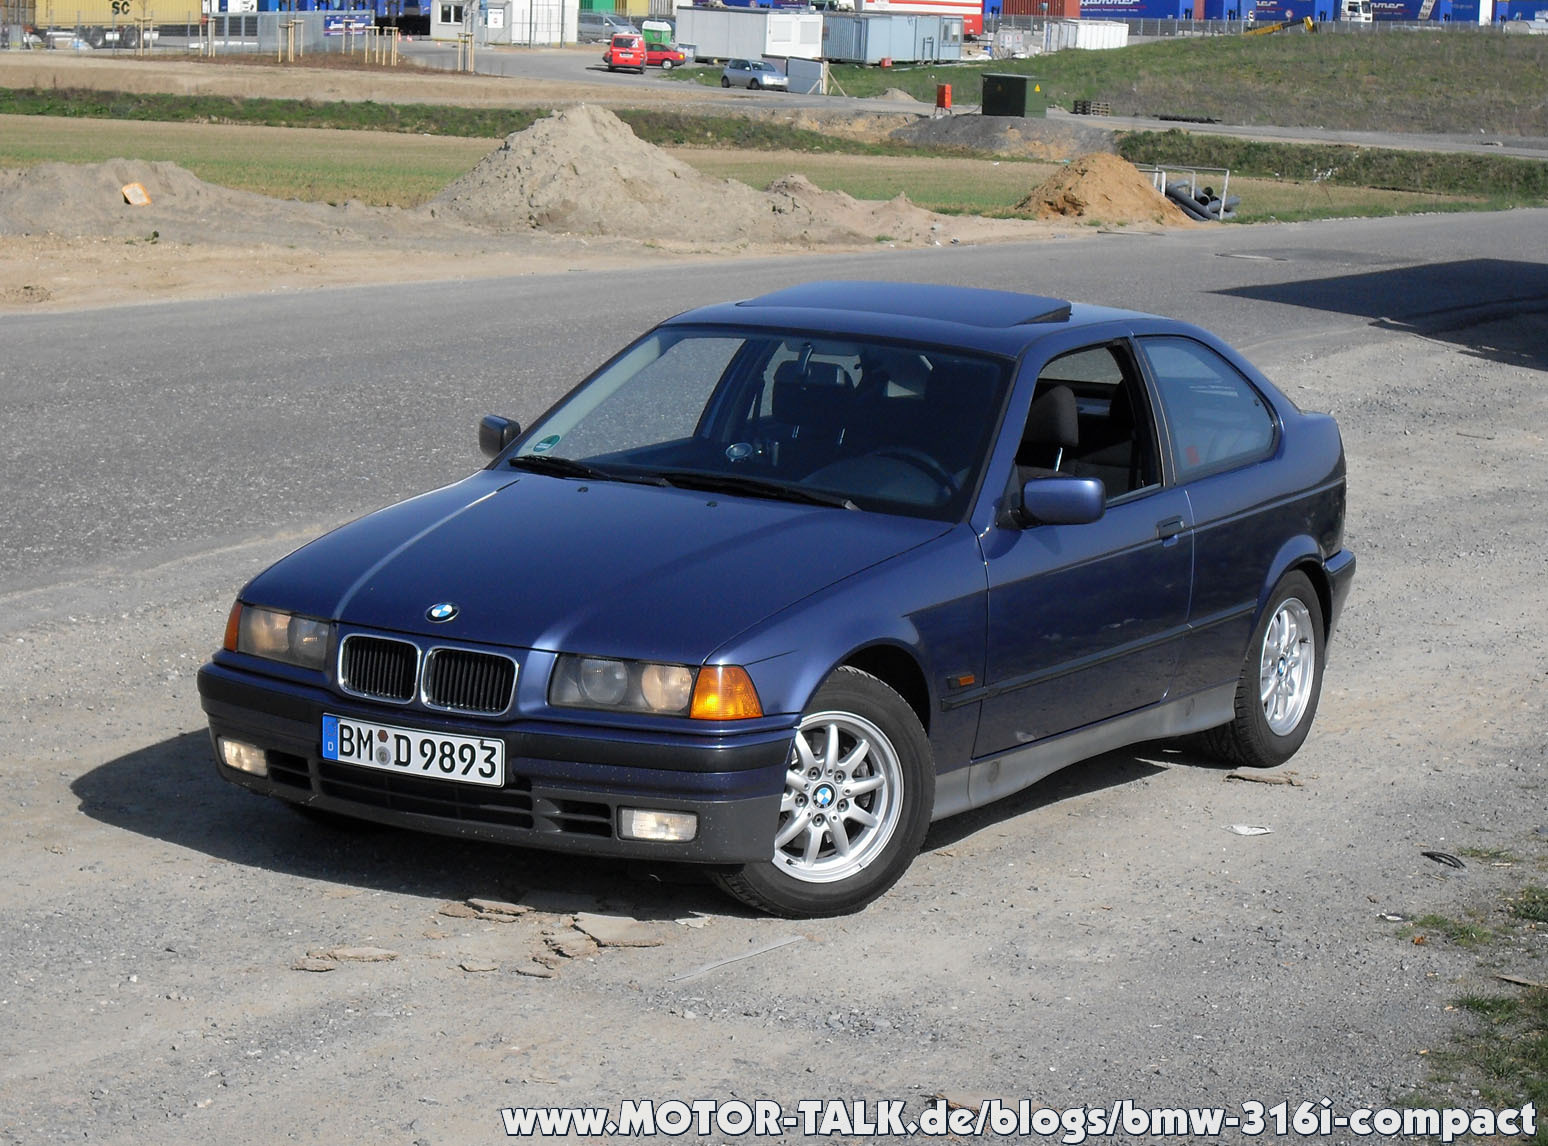 Bmw e36 316i compact chiptuning #6